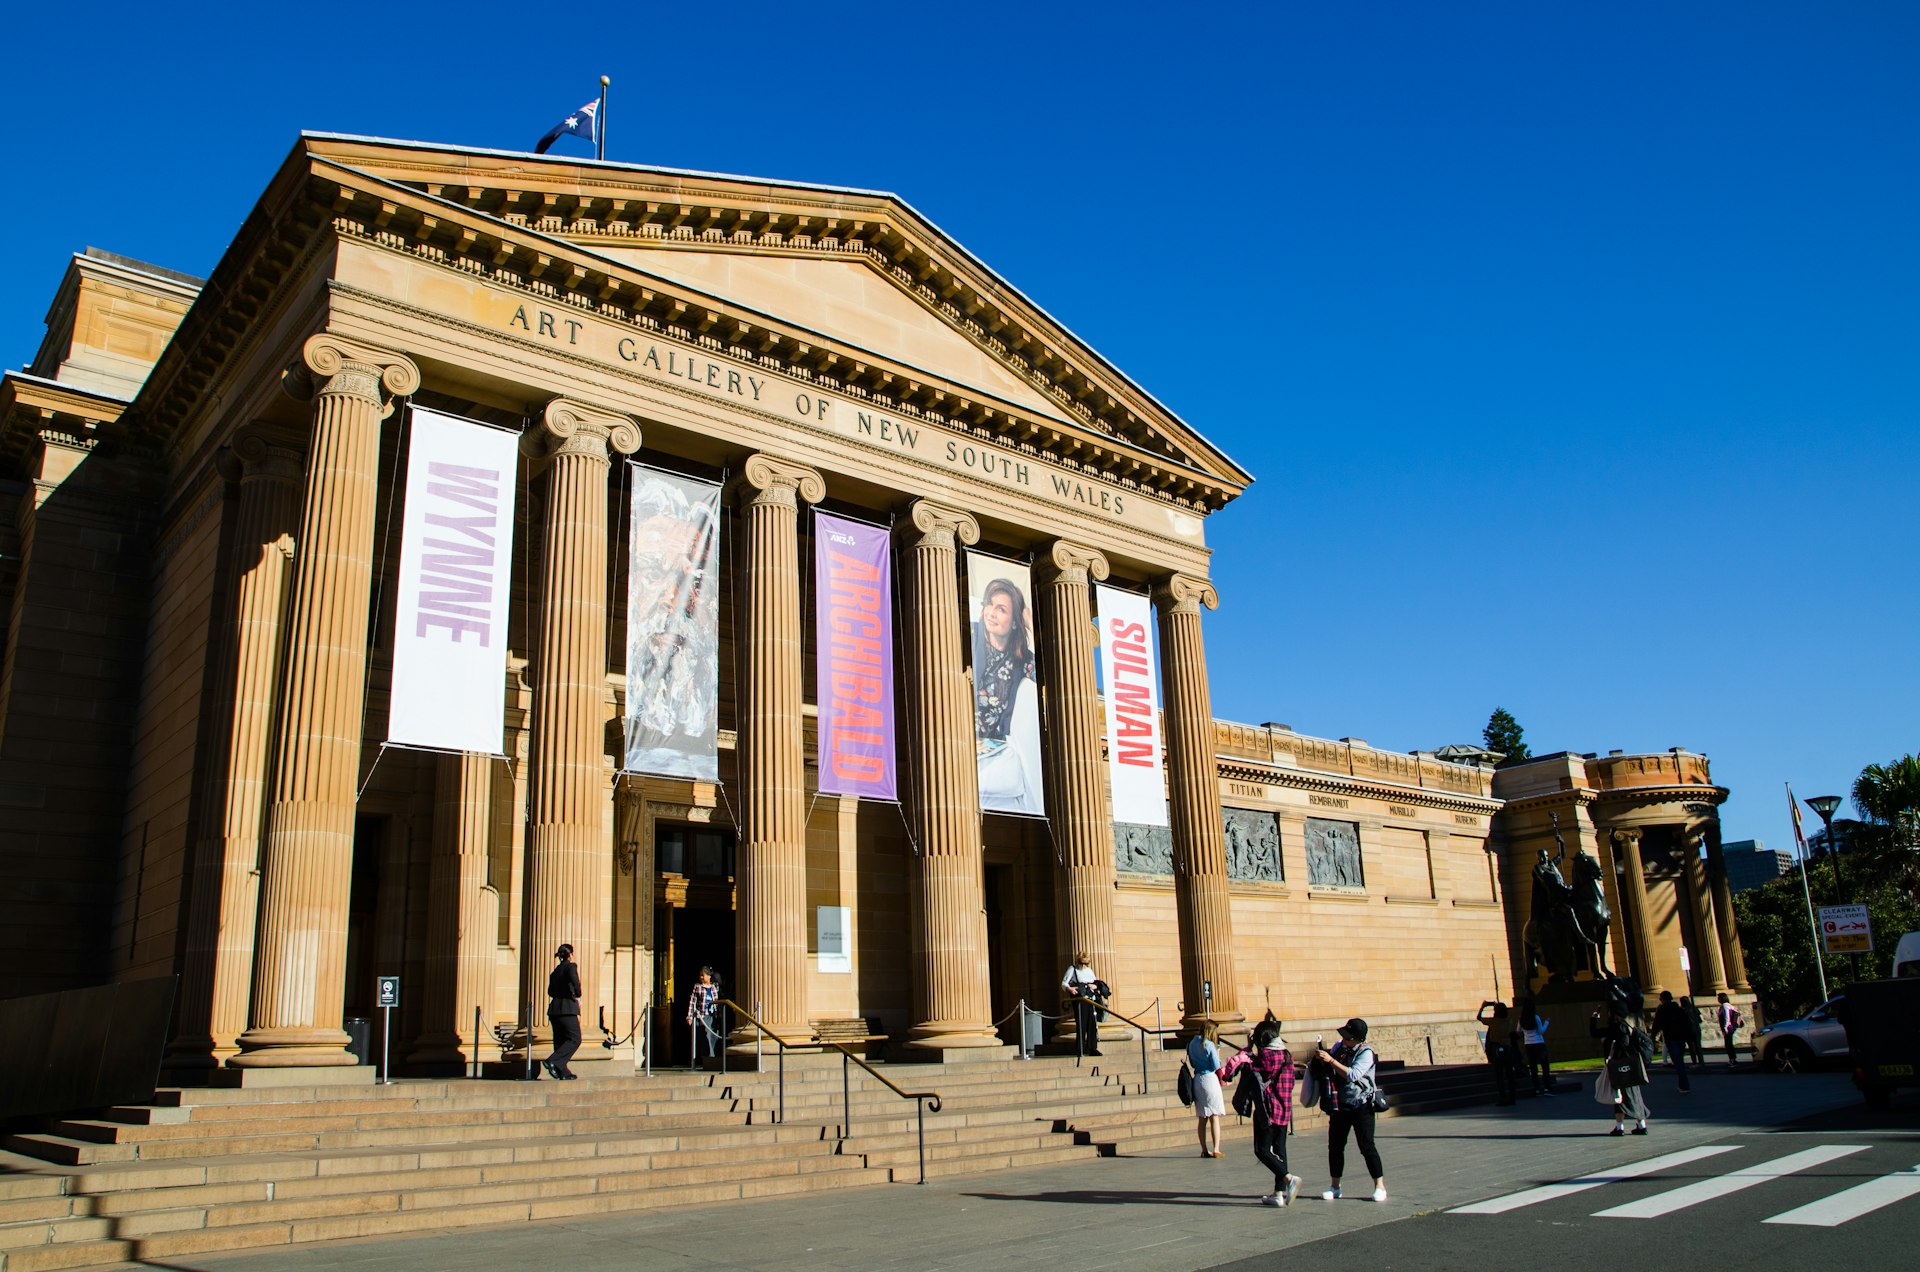 Visitors by the entrance to the Art Gallery of New South Wales